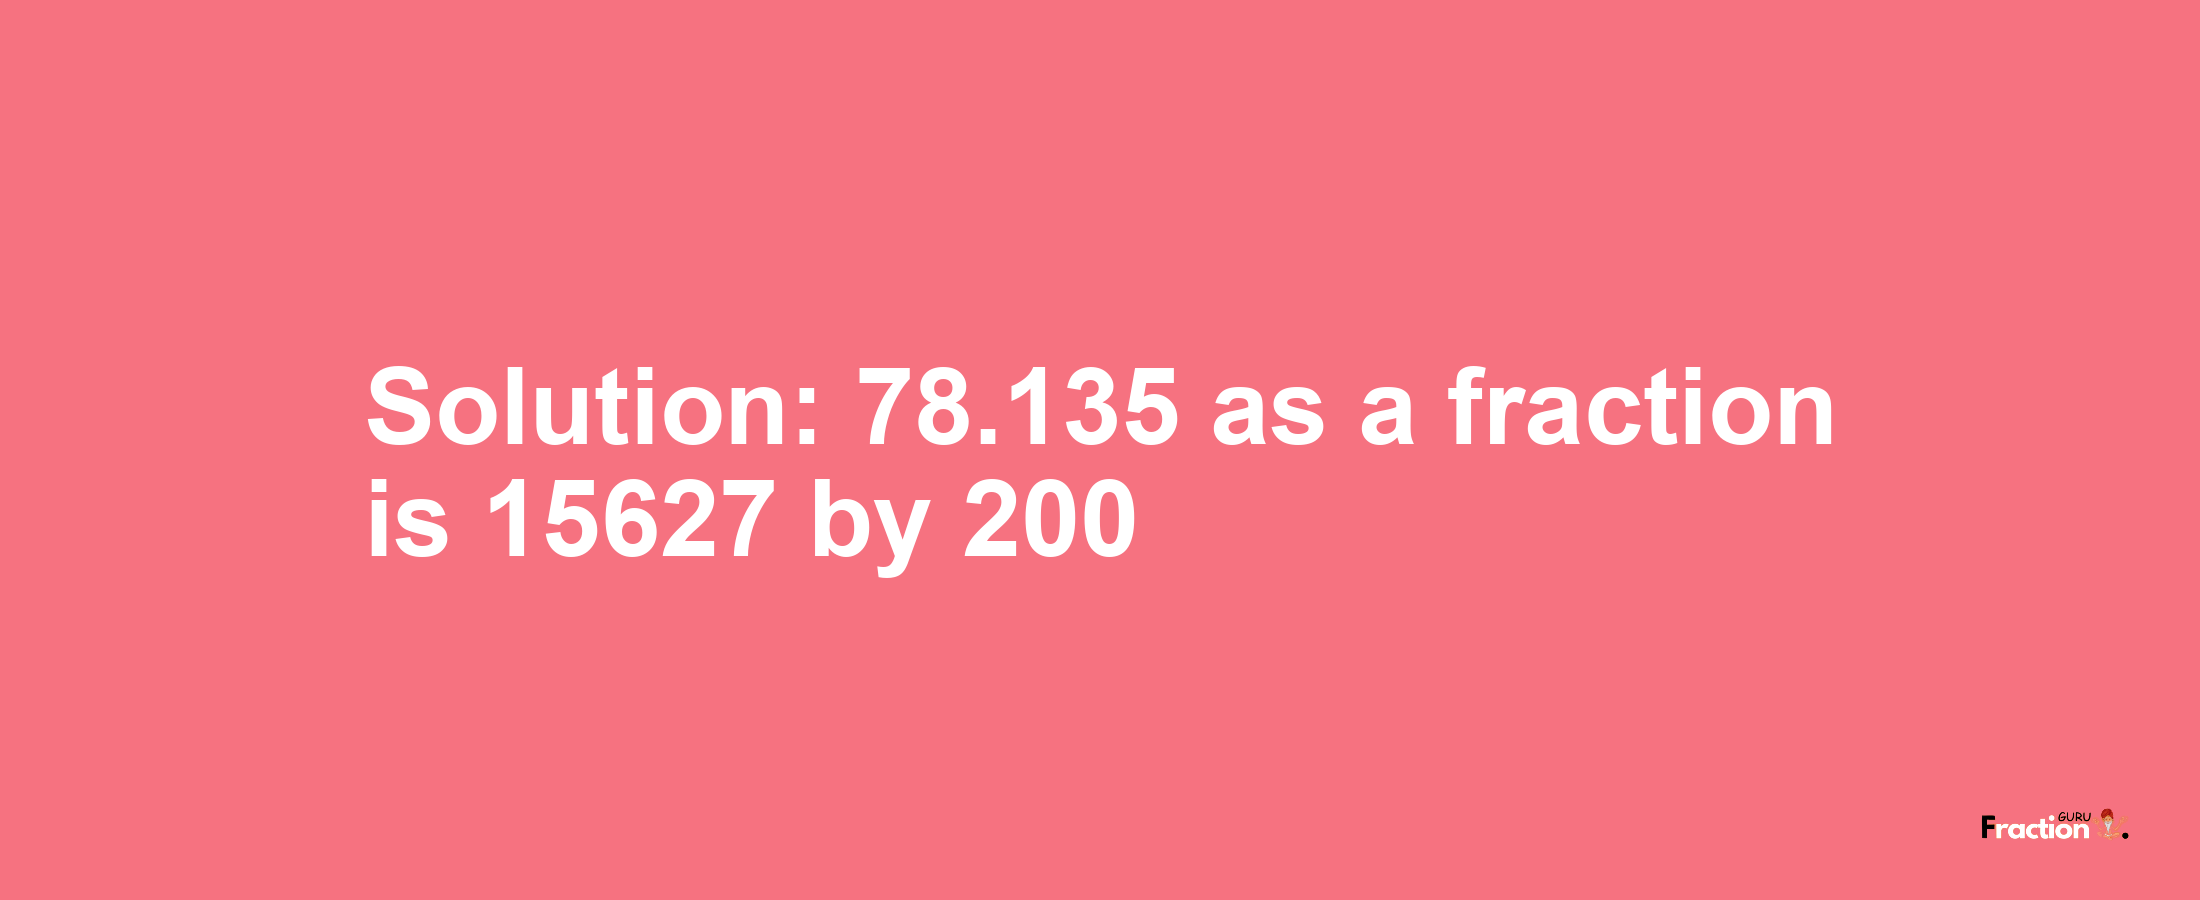 Solution:78.135 as a fraction is 15627/200